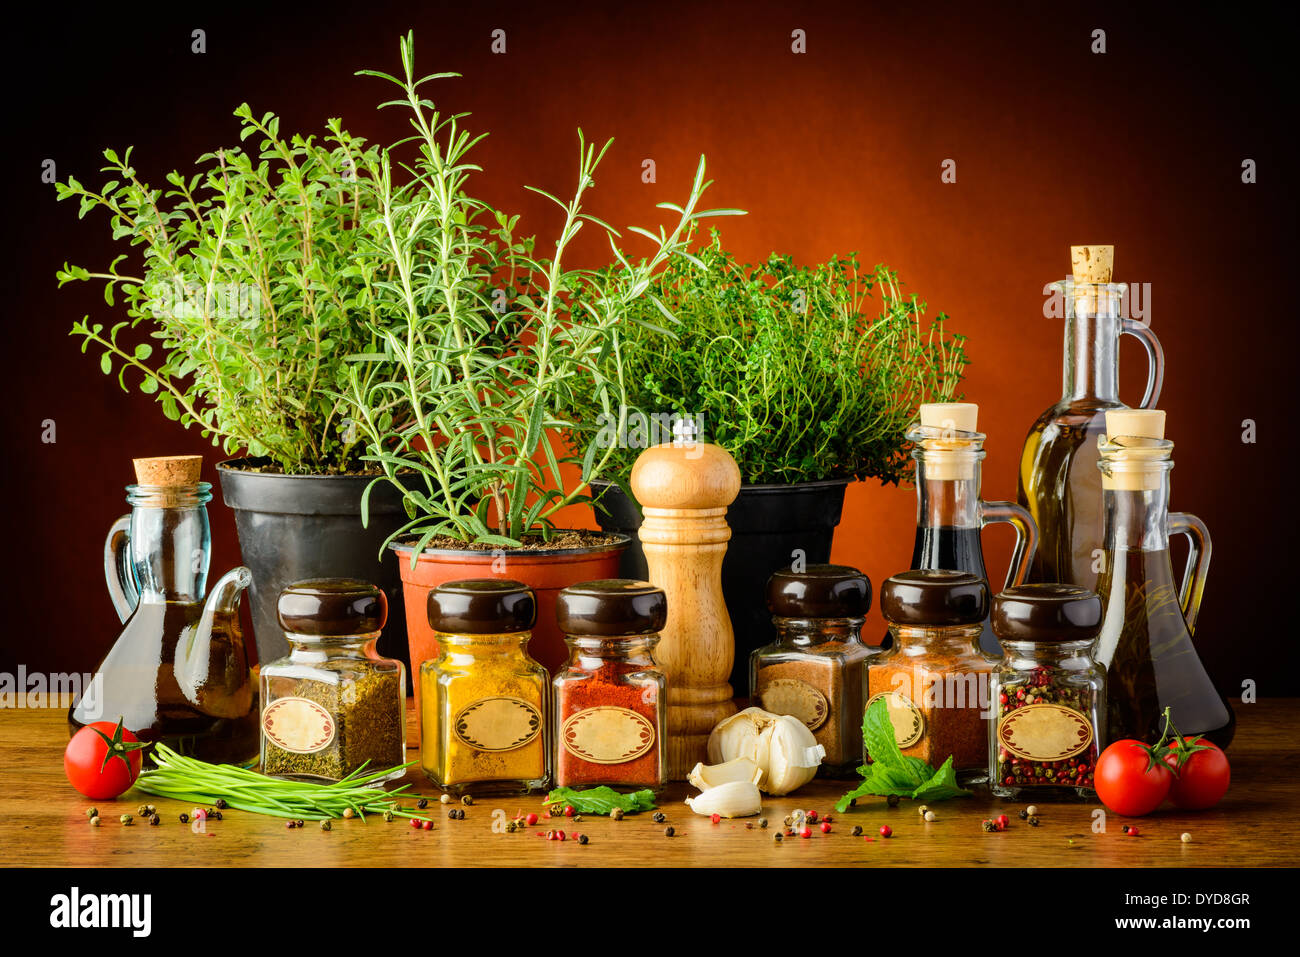 still life with various herbs, spices and olive oil Stock Photo